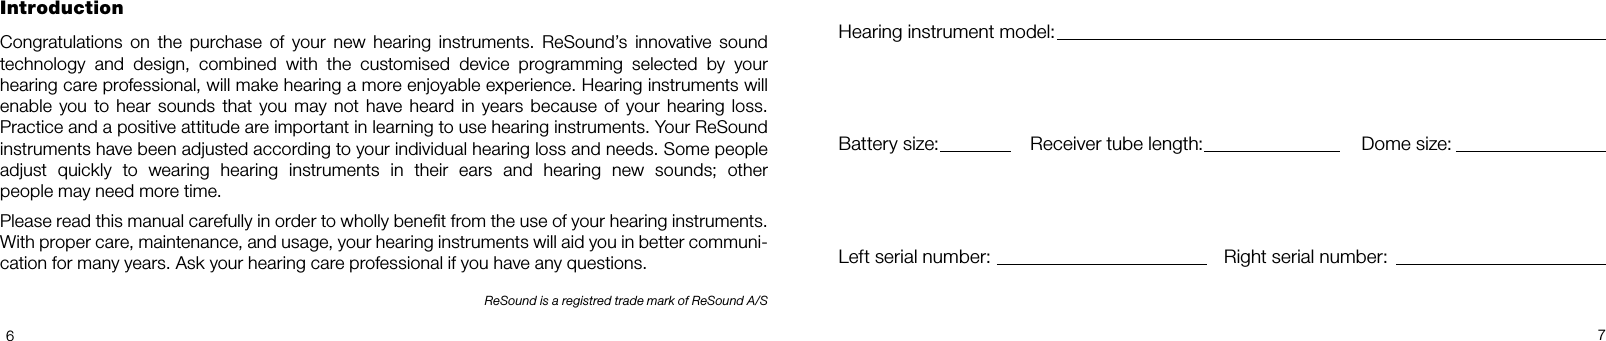 67IntroductionCongratulations  on  the  purchase  of  your  new  hearing  instruments.  ReSound’s  innovative  sound technology  and  design,  combined  with  the  customised  device  programming  selected  by  your  hearing care professional, will make hearing a more enjoyable experience. Hearing instruments will enable you  to hear sounds that you  may not  have heard  in years because  of your  hearing  loss. Practice and a positive attitude are important in learning to use hearing instruments. Your ReSound instruments have been adjusted according to your individual hearing loss and needs. Some people  adjust  quickly  to  wearing  hearing  instruments  in  their  ears  and  hearing  new  sounds;  other  people may need more time.Please read this manual carefully in order to wholly benet from the use of your hearing instruments. With proper care, maintenance, and usage, your hearing instruments will aid you in better communi-cation for many years. Ask your hearing care professional if you have any questions.ReSound is a registred trade mark of ReSound A/SHearing instrument model:Battery size: Receiver tube length: Dome size:Left serial number: Right serial number: